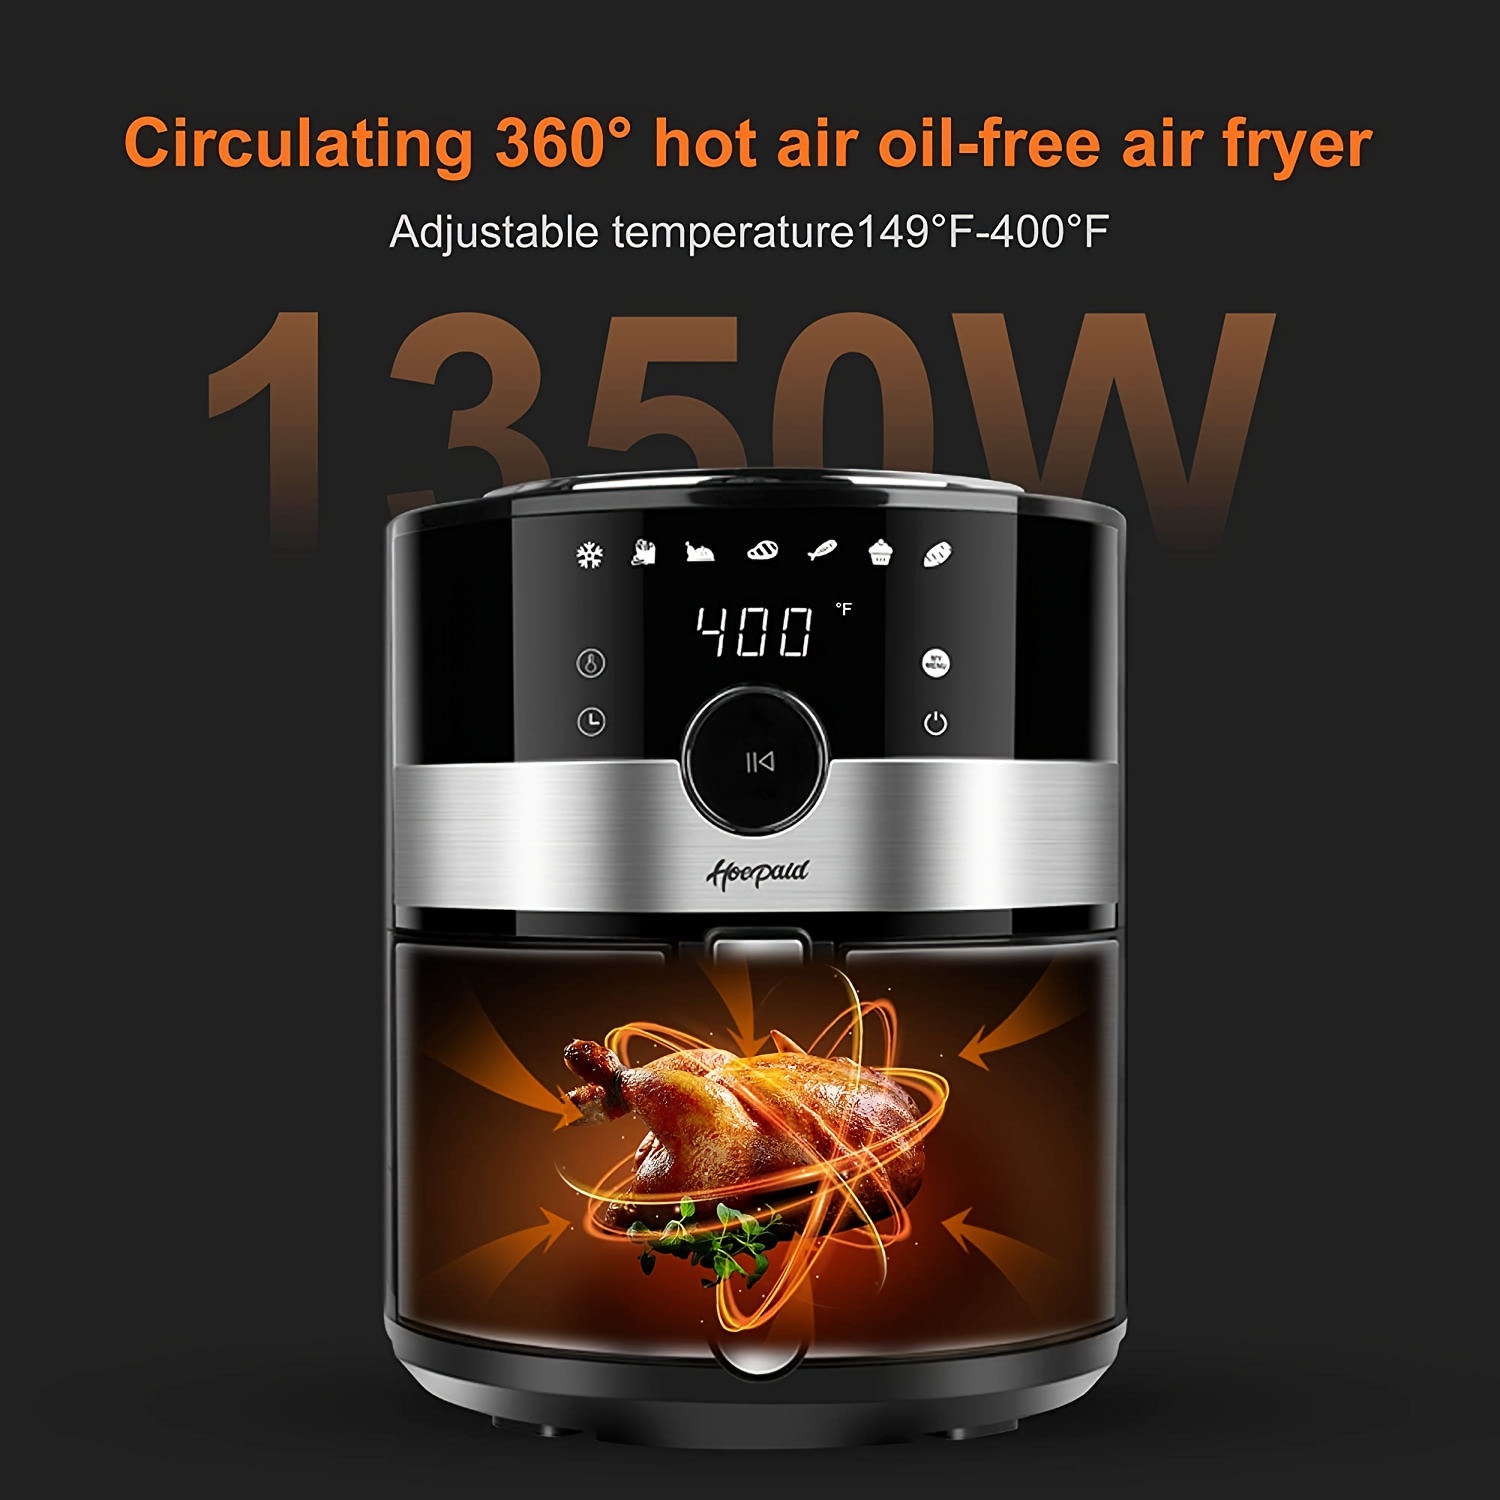 air fryer 3 6 quart family electric oilless hot air fryer oven with non stick basket and rack touch screen and knob 8 preset modes led display suitable for home party office 1350w details 2